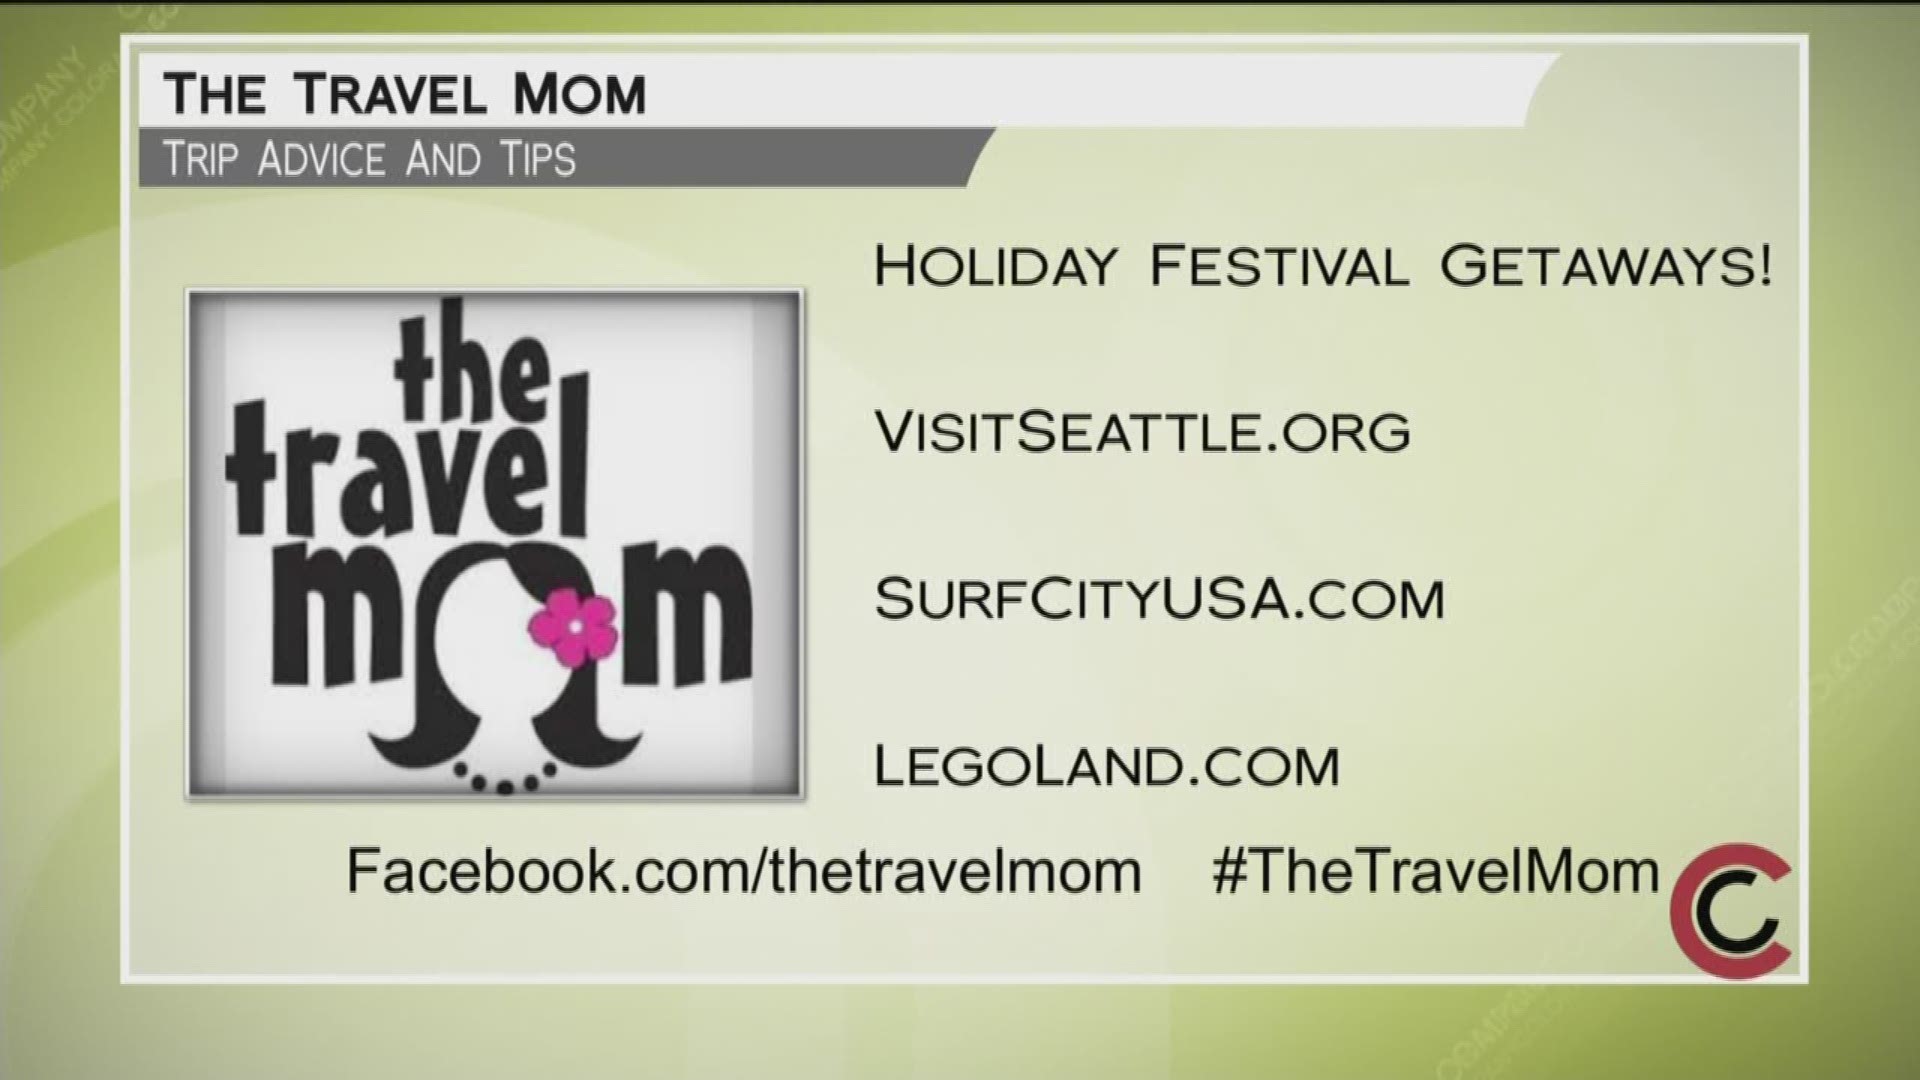 Get more tips from Travel Mom Emily Kaufman online at the www.TheTravelMom.com.